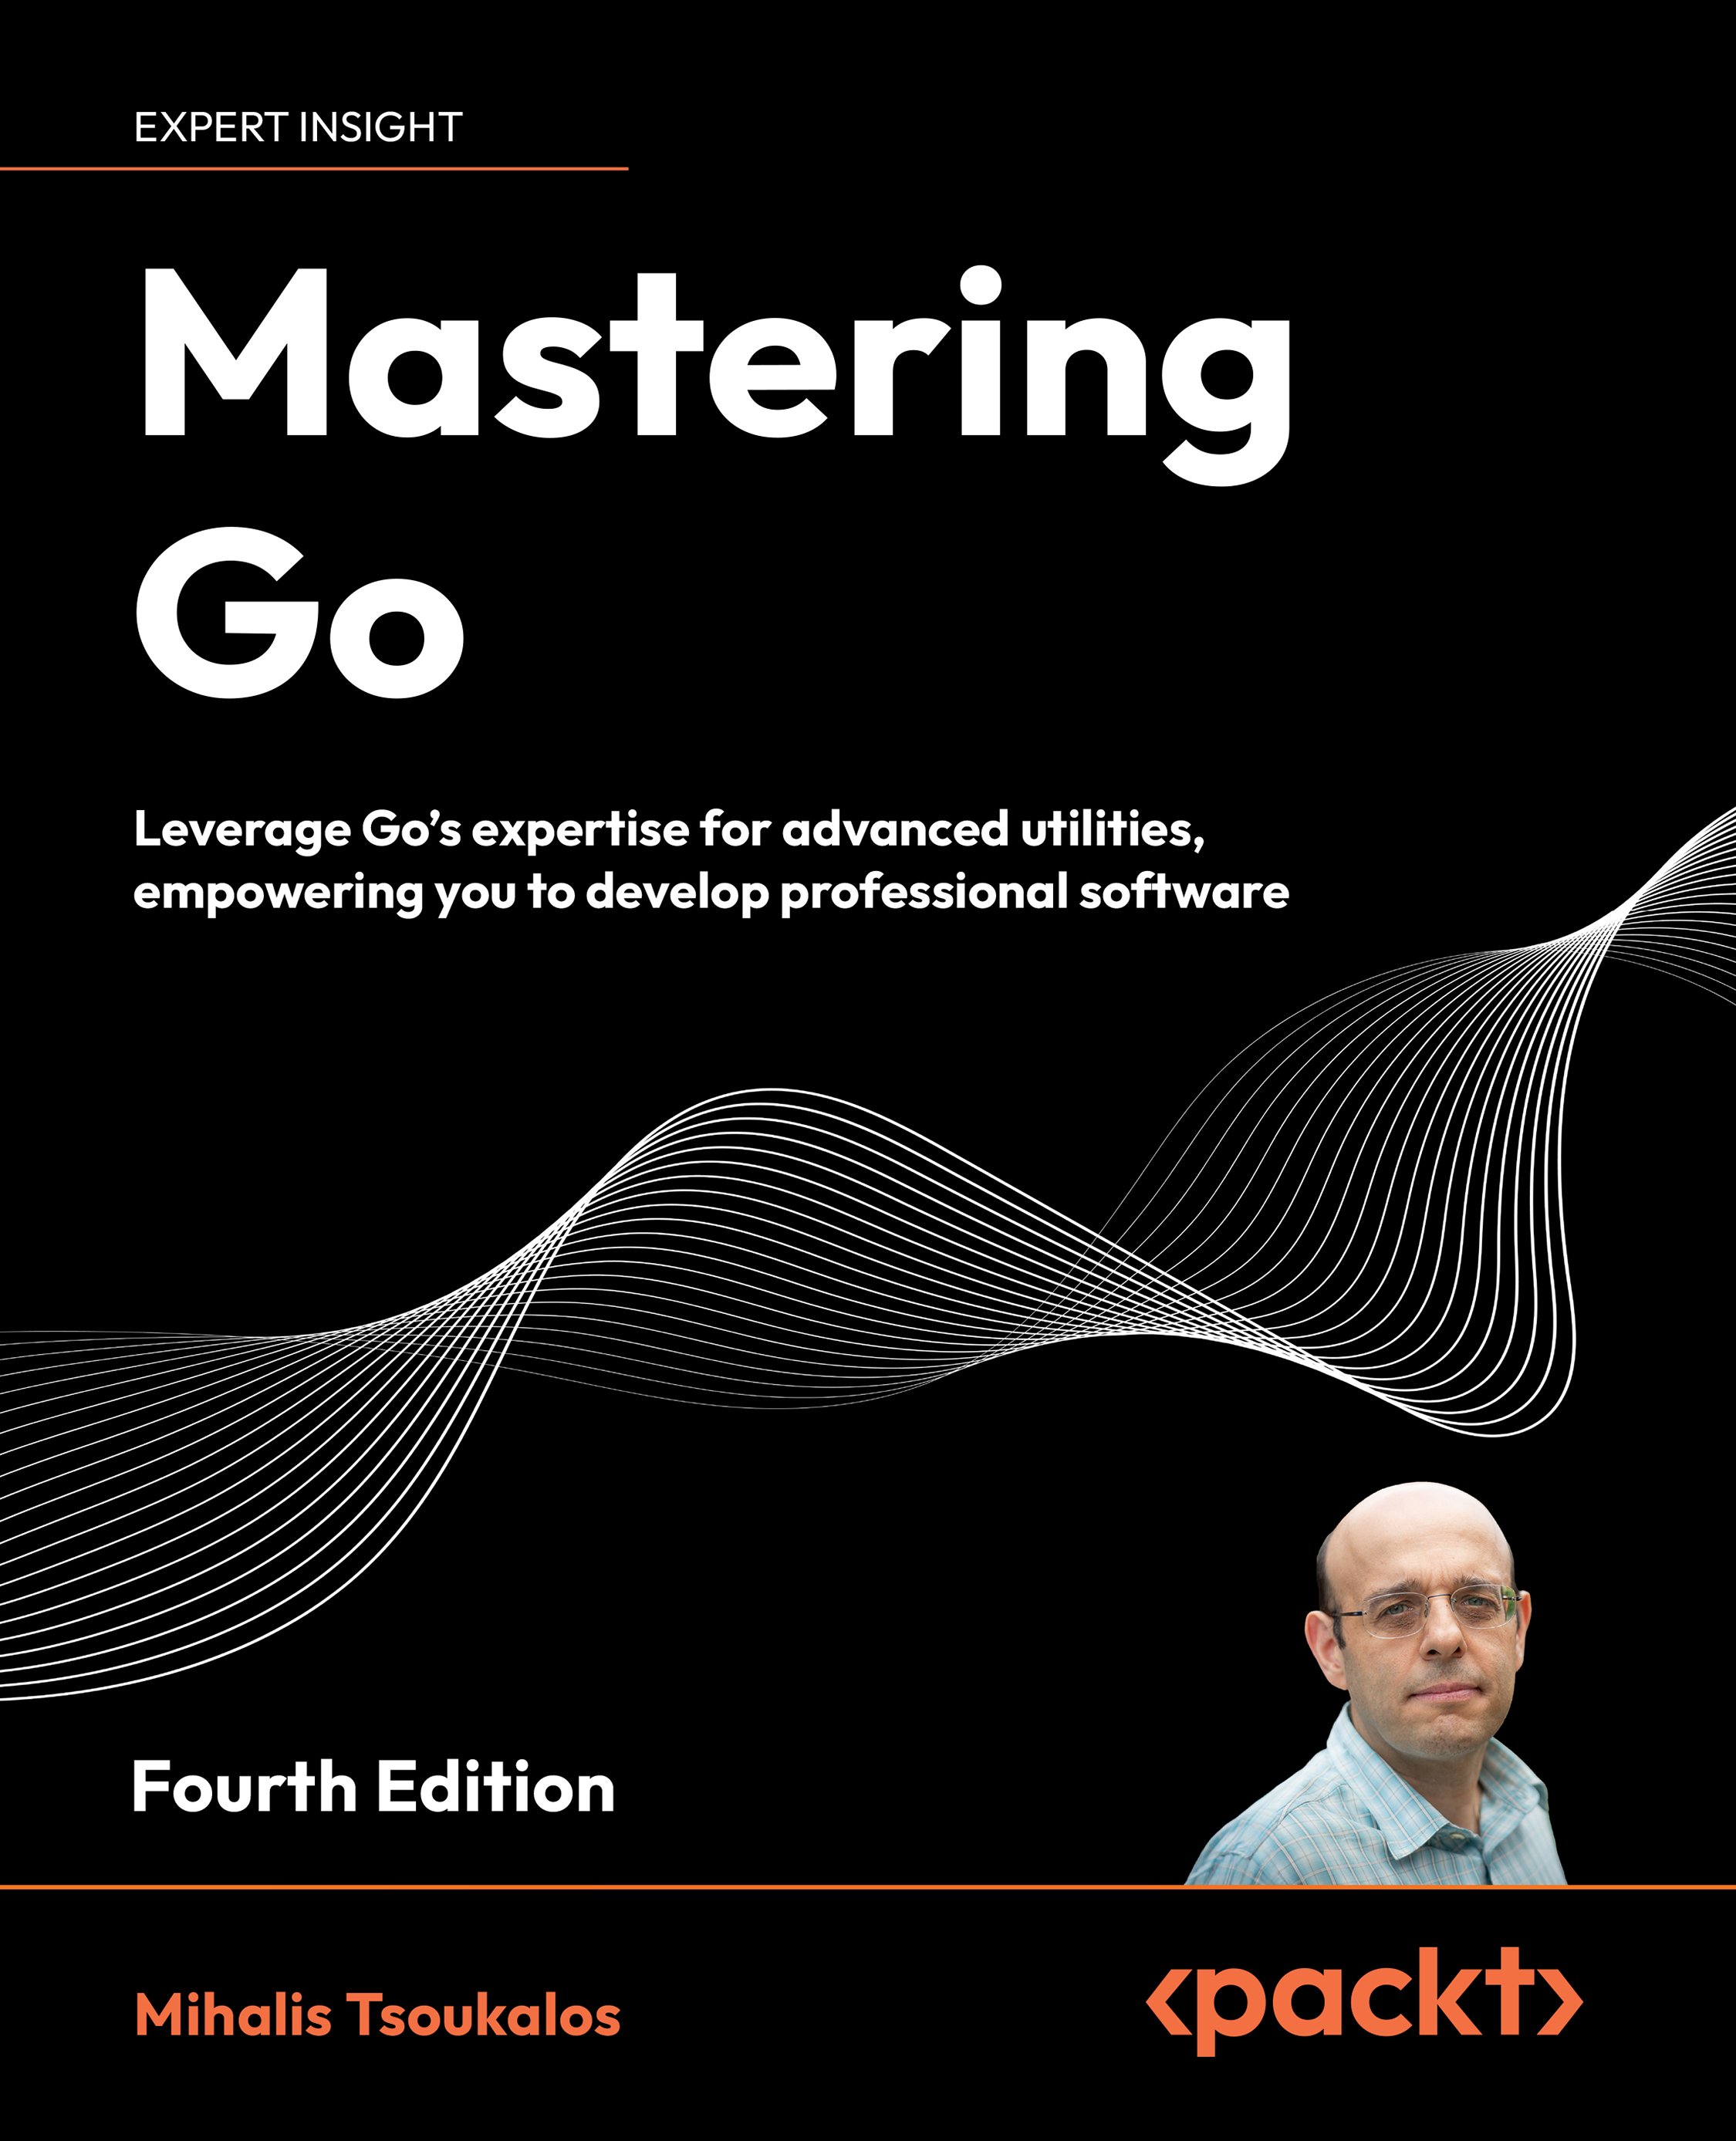 Mastering Go: Leverage Go's expertise for advanced utilities, empowering you to develop professional software, Fourth Edition